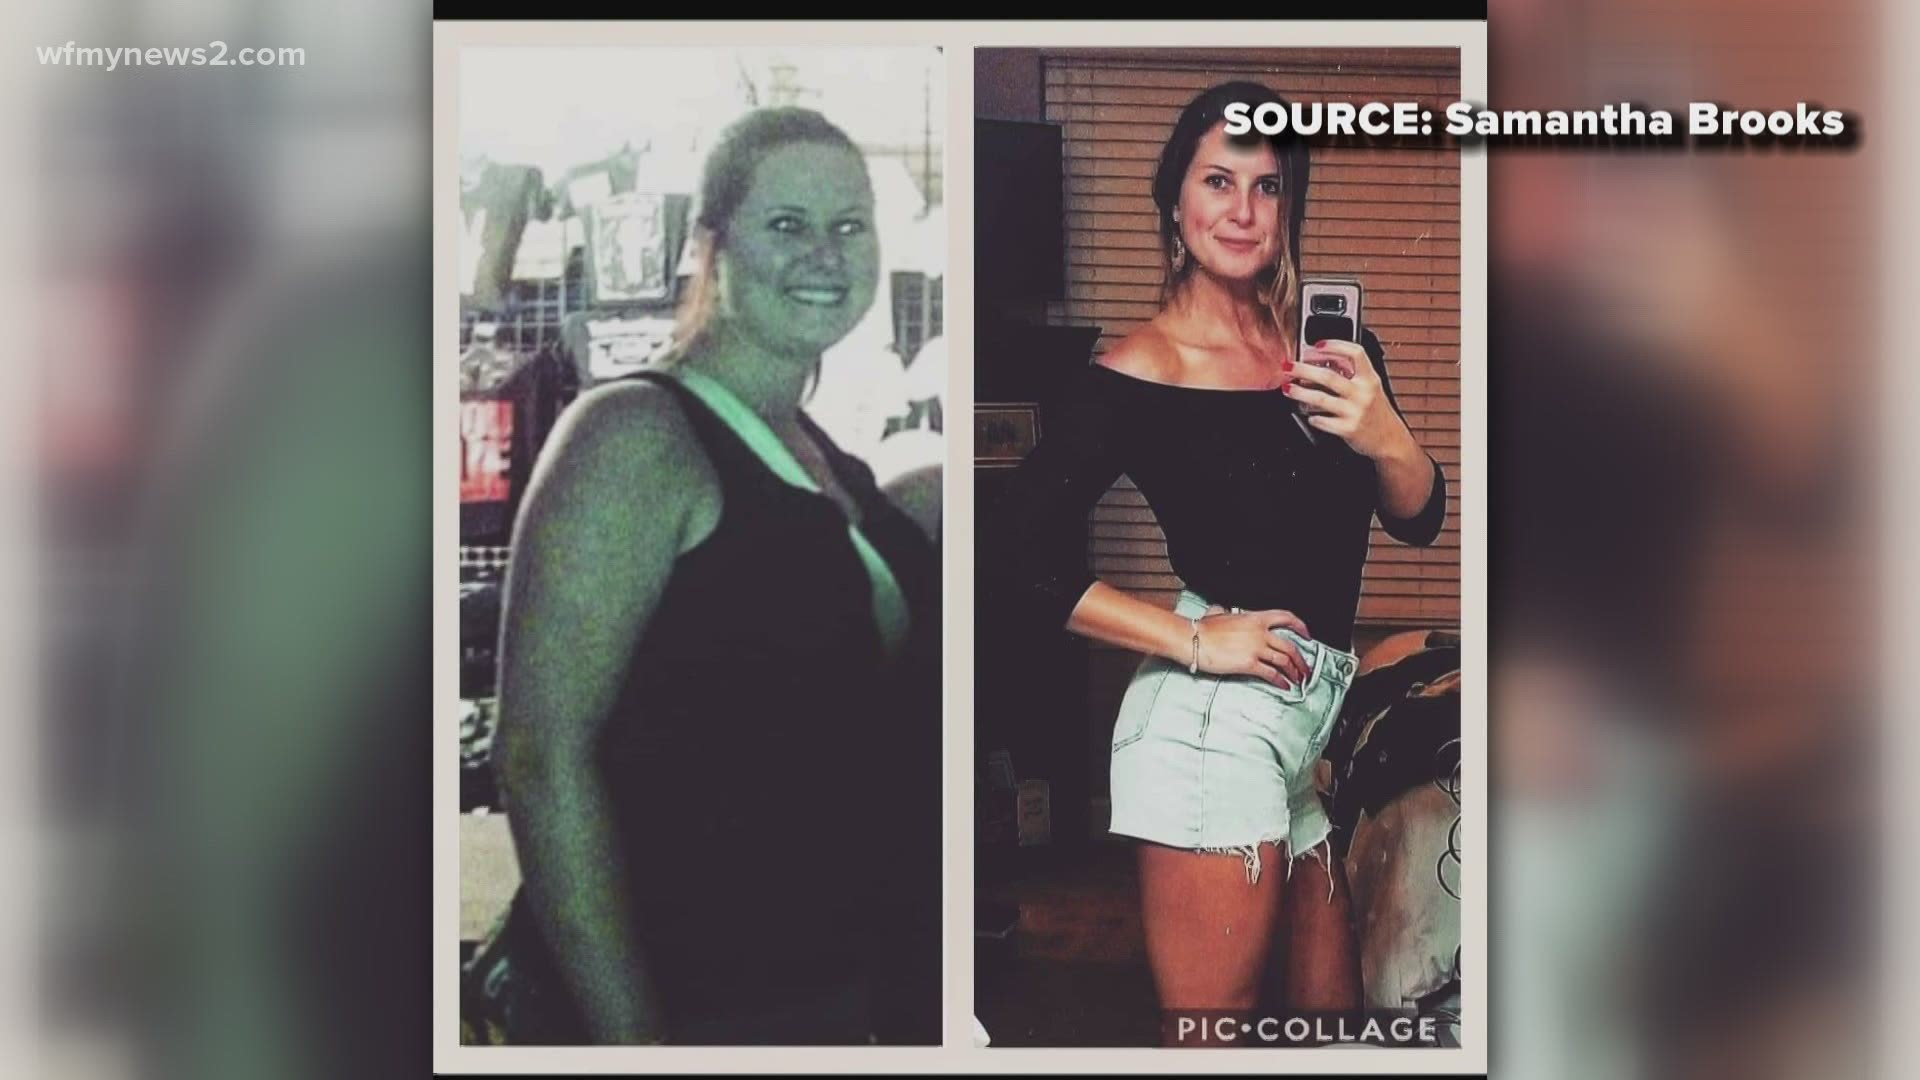 Losing weight isn’t the easiest. It’s difficult not to fall into the trap of trendy diets. Sammy Brooks talks about her journey from size 16 to 2.